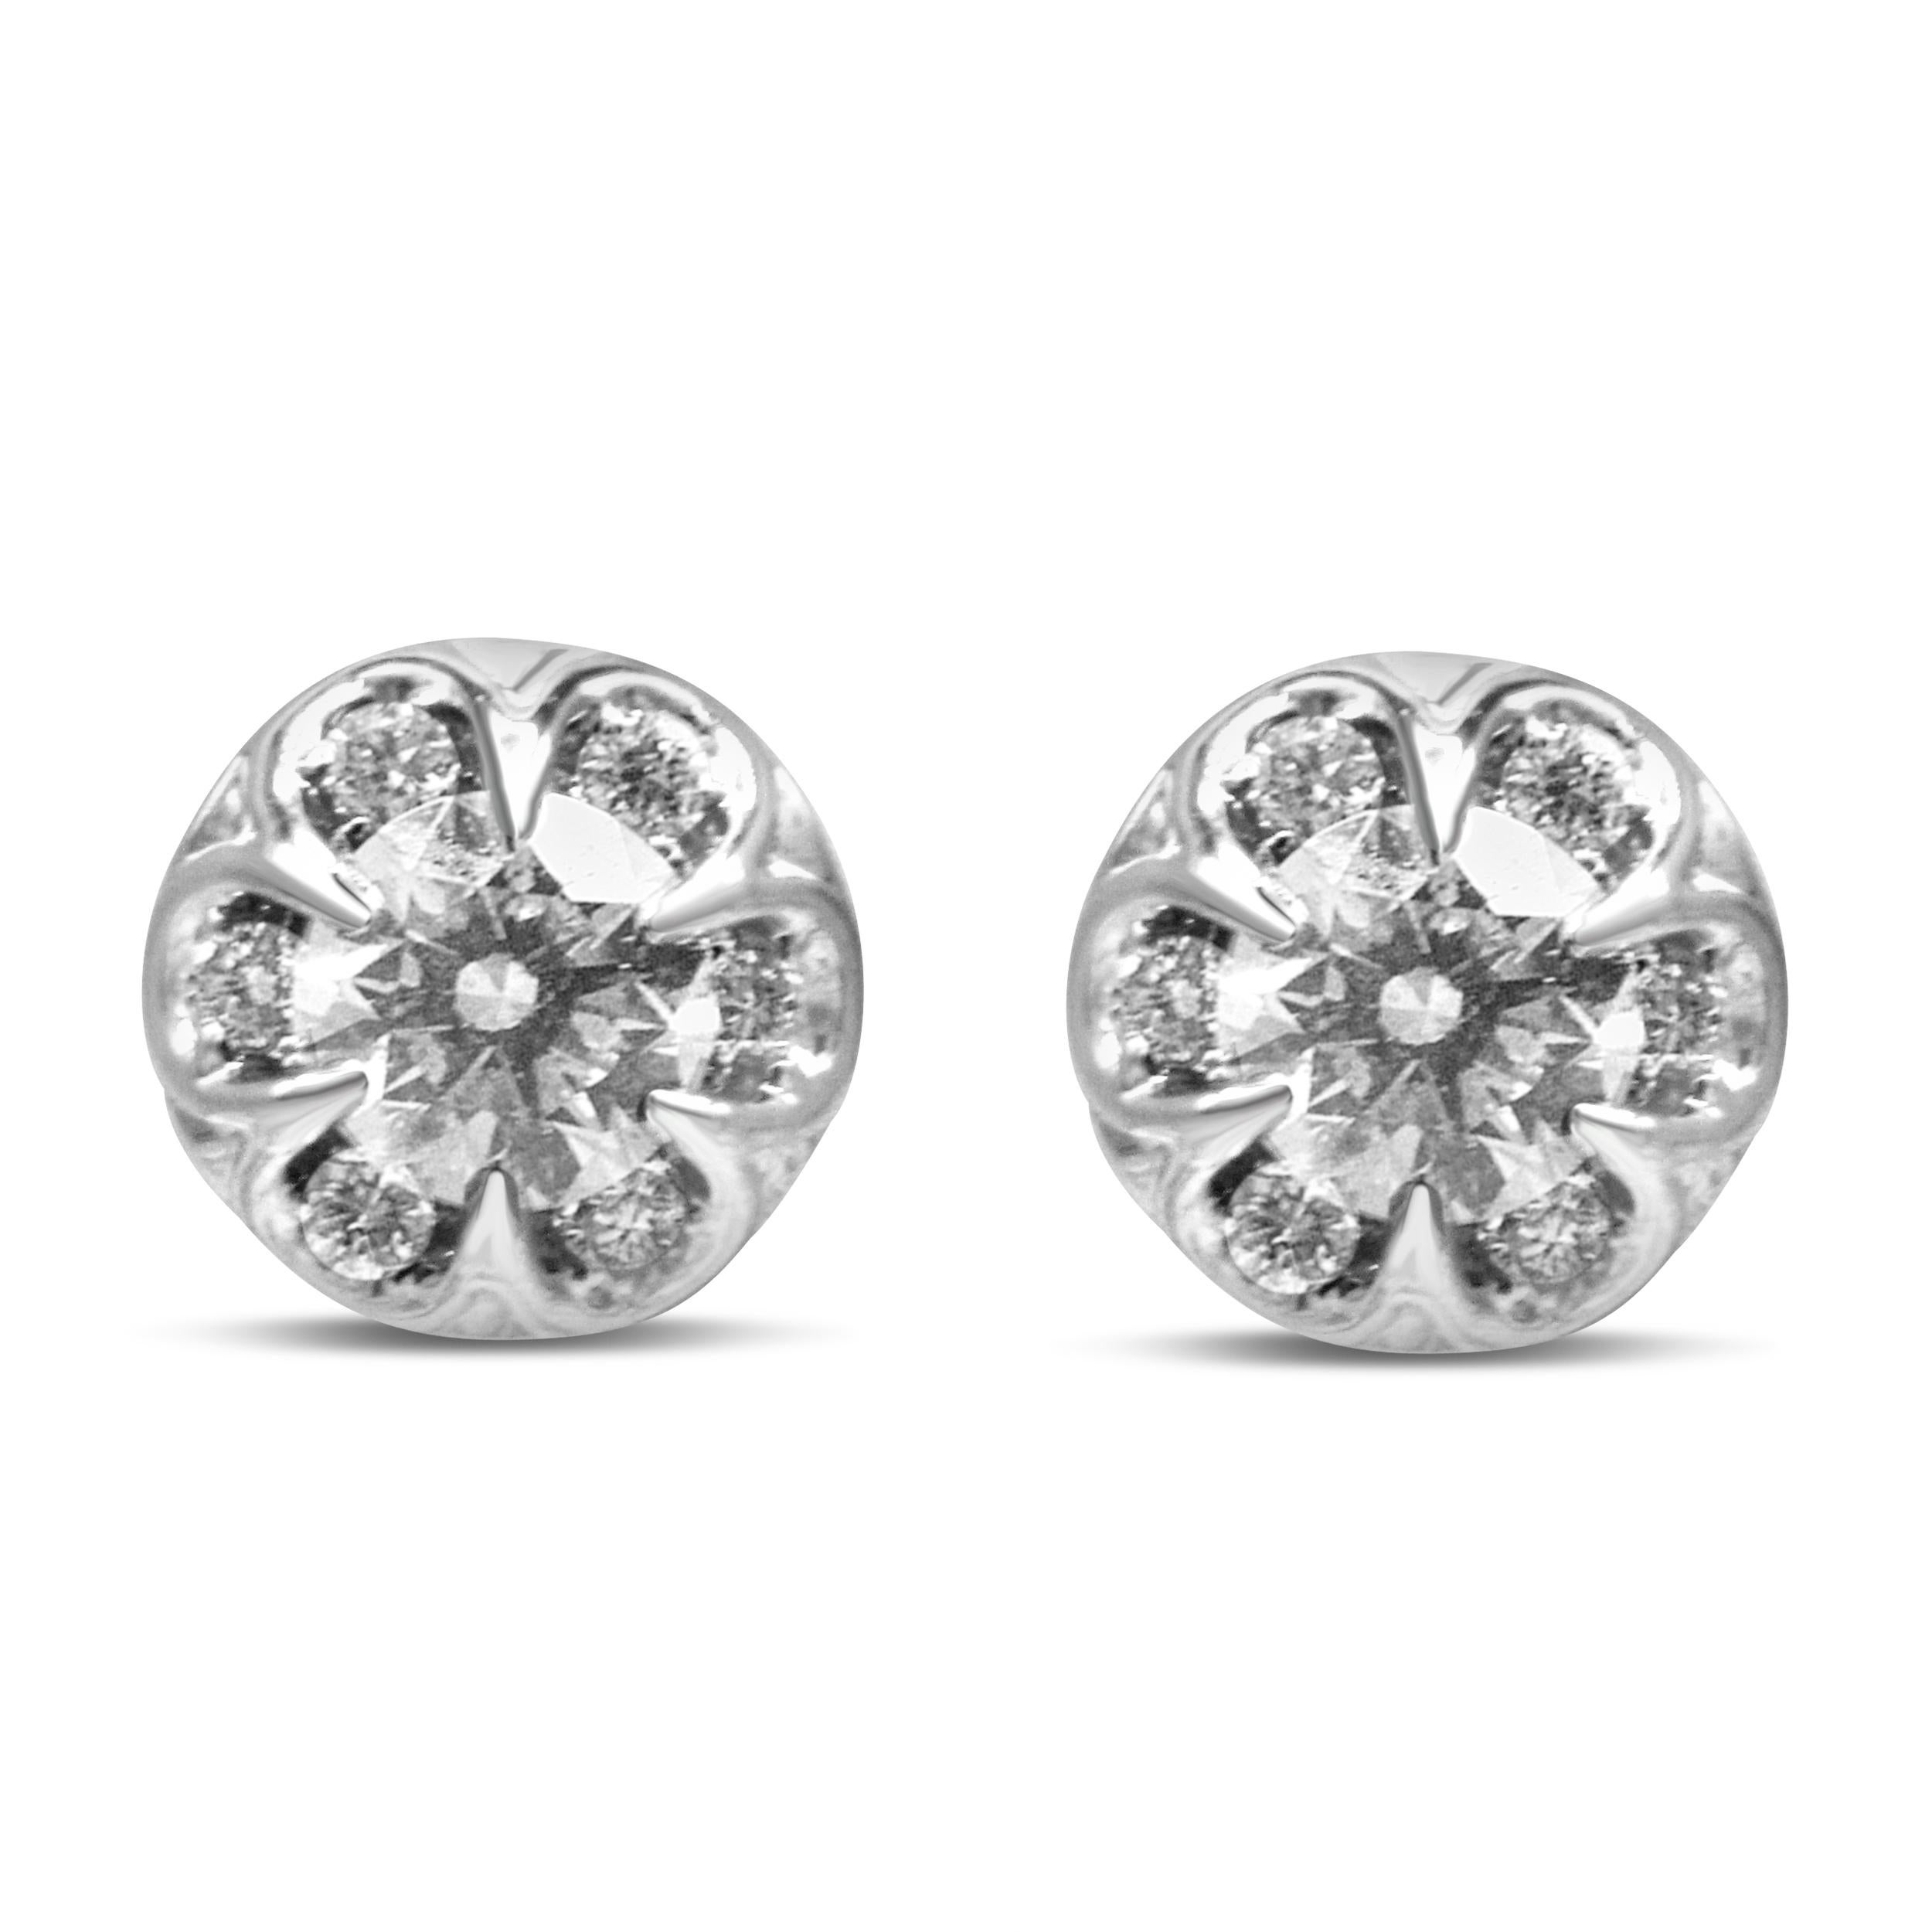 These splendid diamond earrings will add a marvelous touch of sparkle to both your everyday looks and eveningwear attire. The look captures an elegant style composed of round white, natural diamonds clustered together to create an impressive